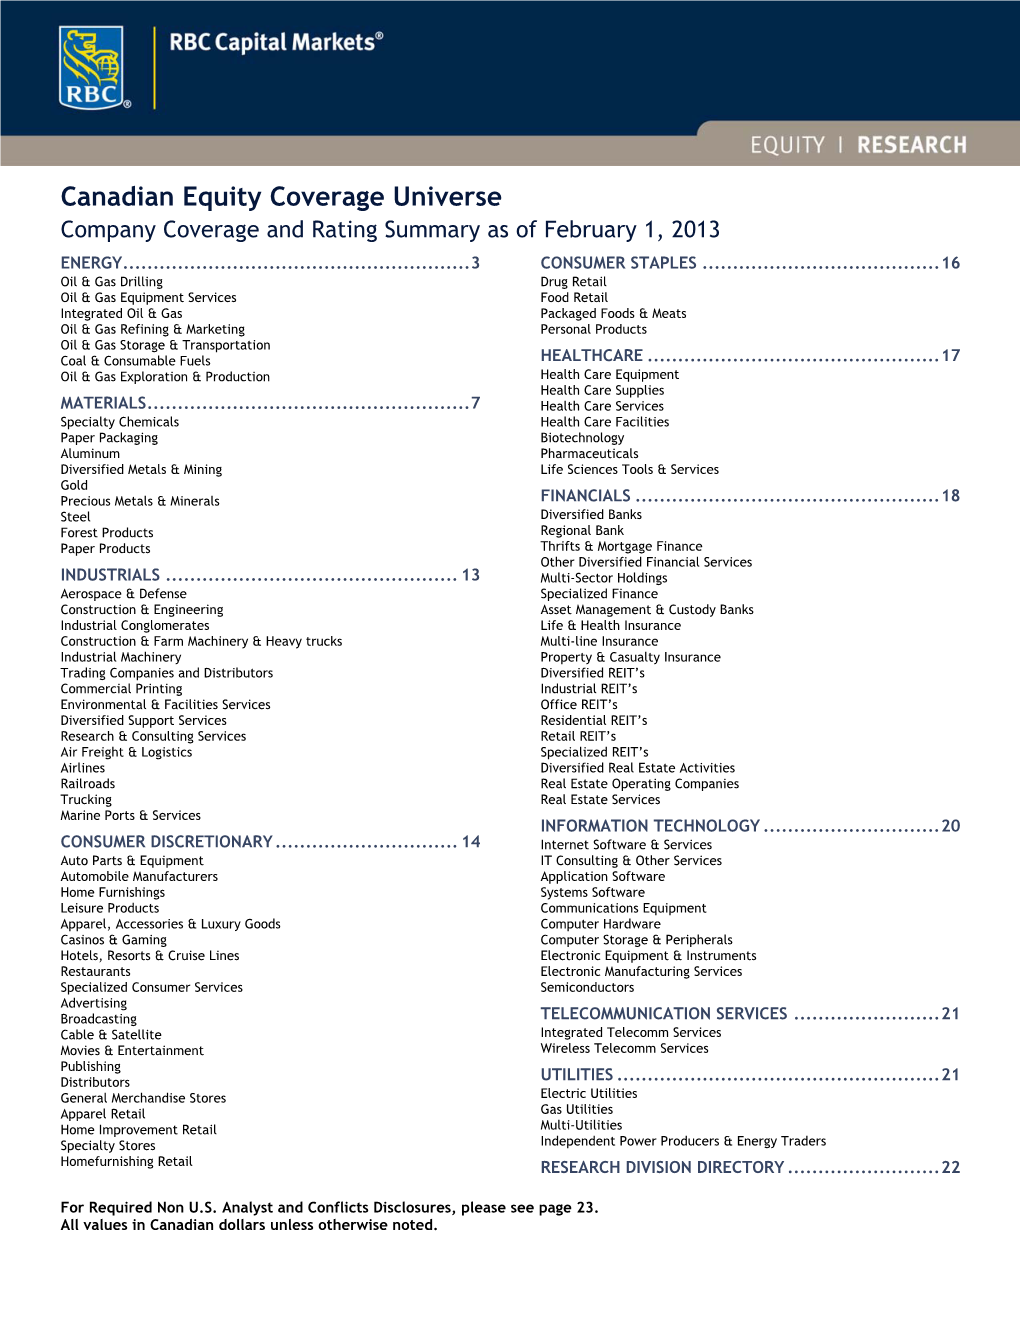 RBCCM Canadian Equity Coverage Universe As of February 1, 2013